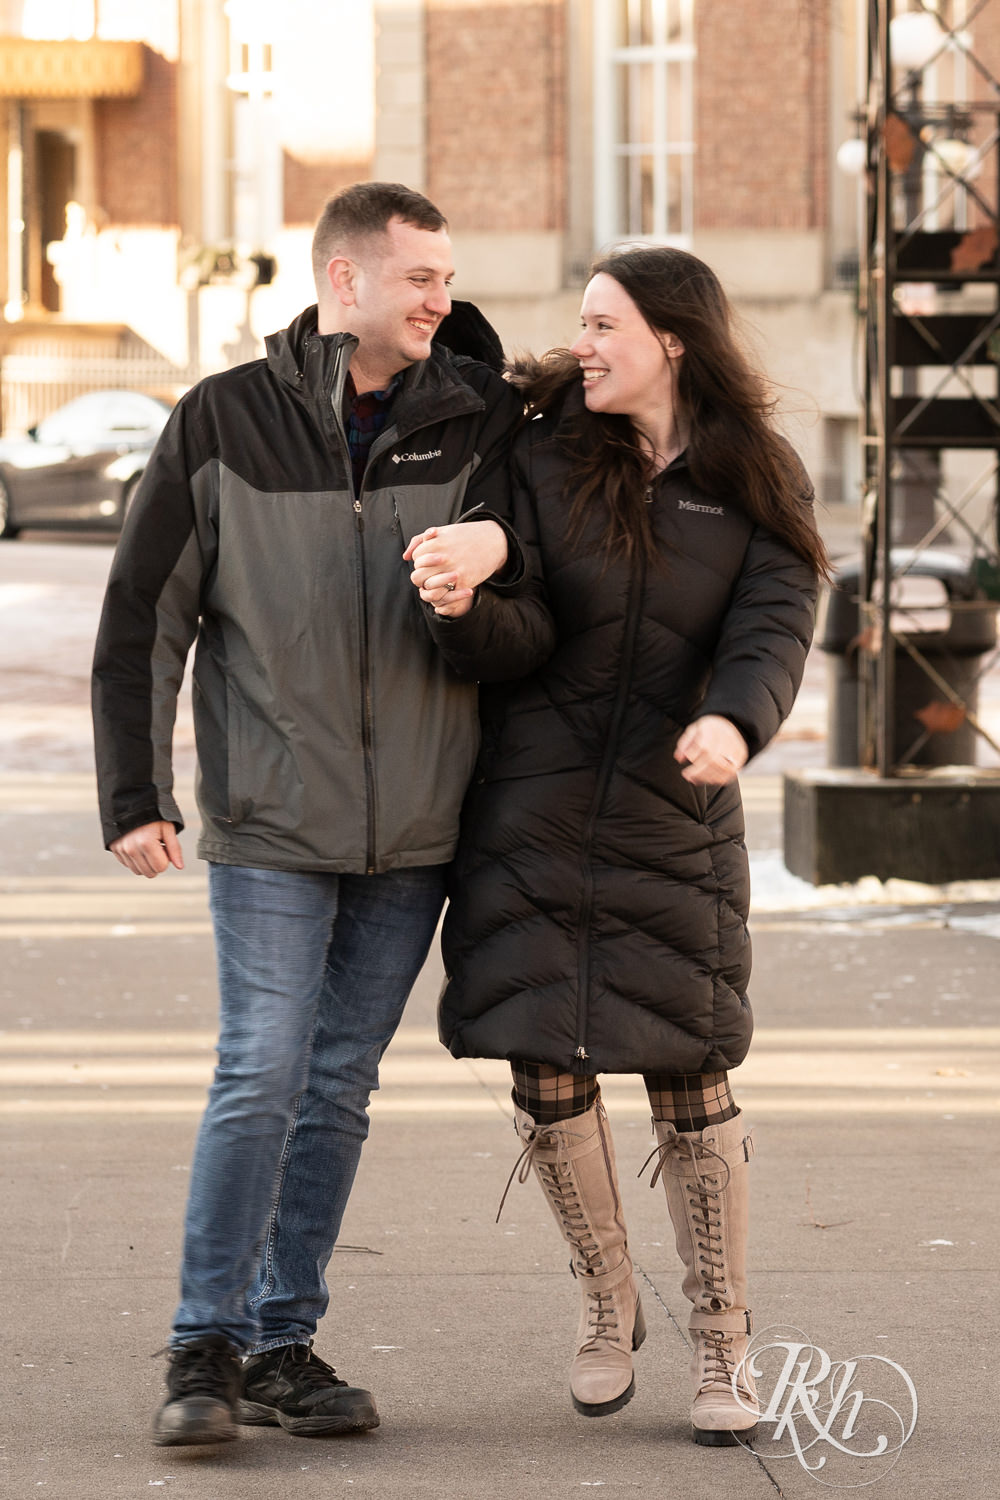 Man and woman in jackets walk and laugh in Saint Paul, Minnesota during winter engagement session.